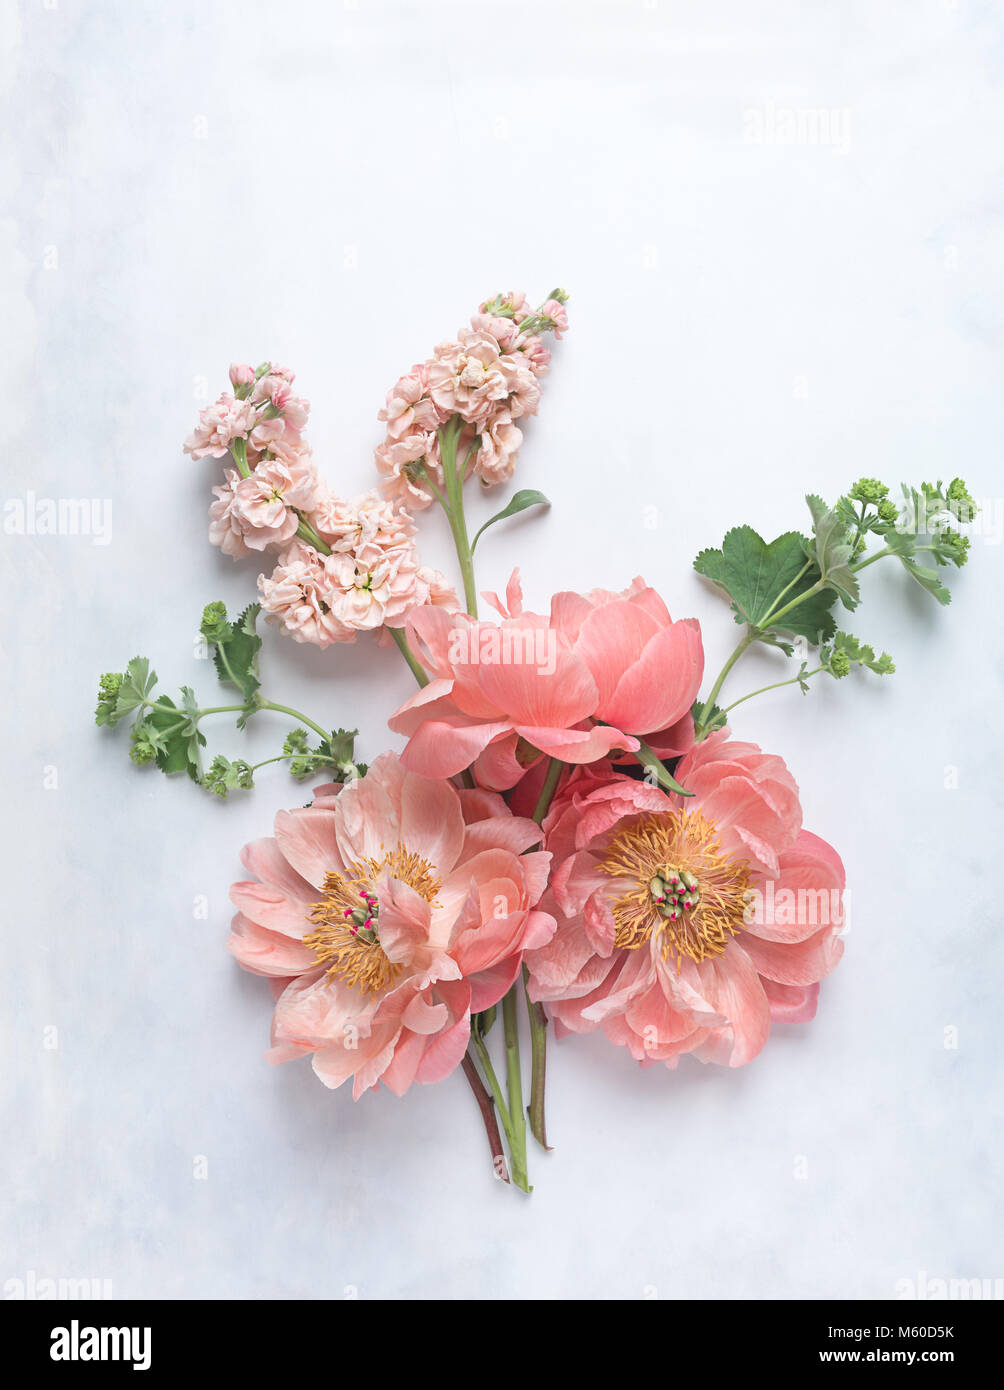 view from above of three coral peonies in bloom with two pink stocks and sprigs of lady's mantle, laid on painted white and grey backdrop, portrait Stock Photo